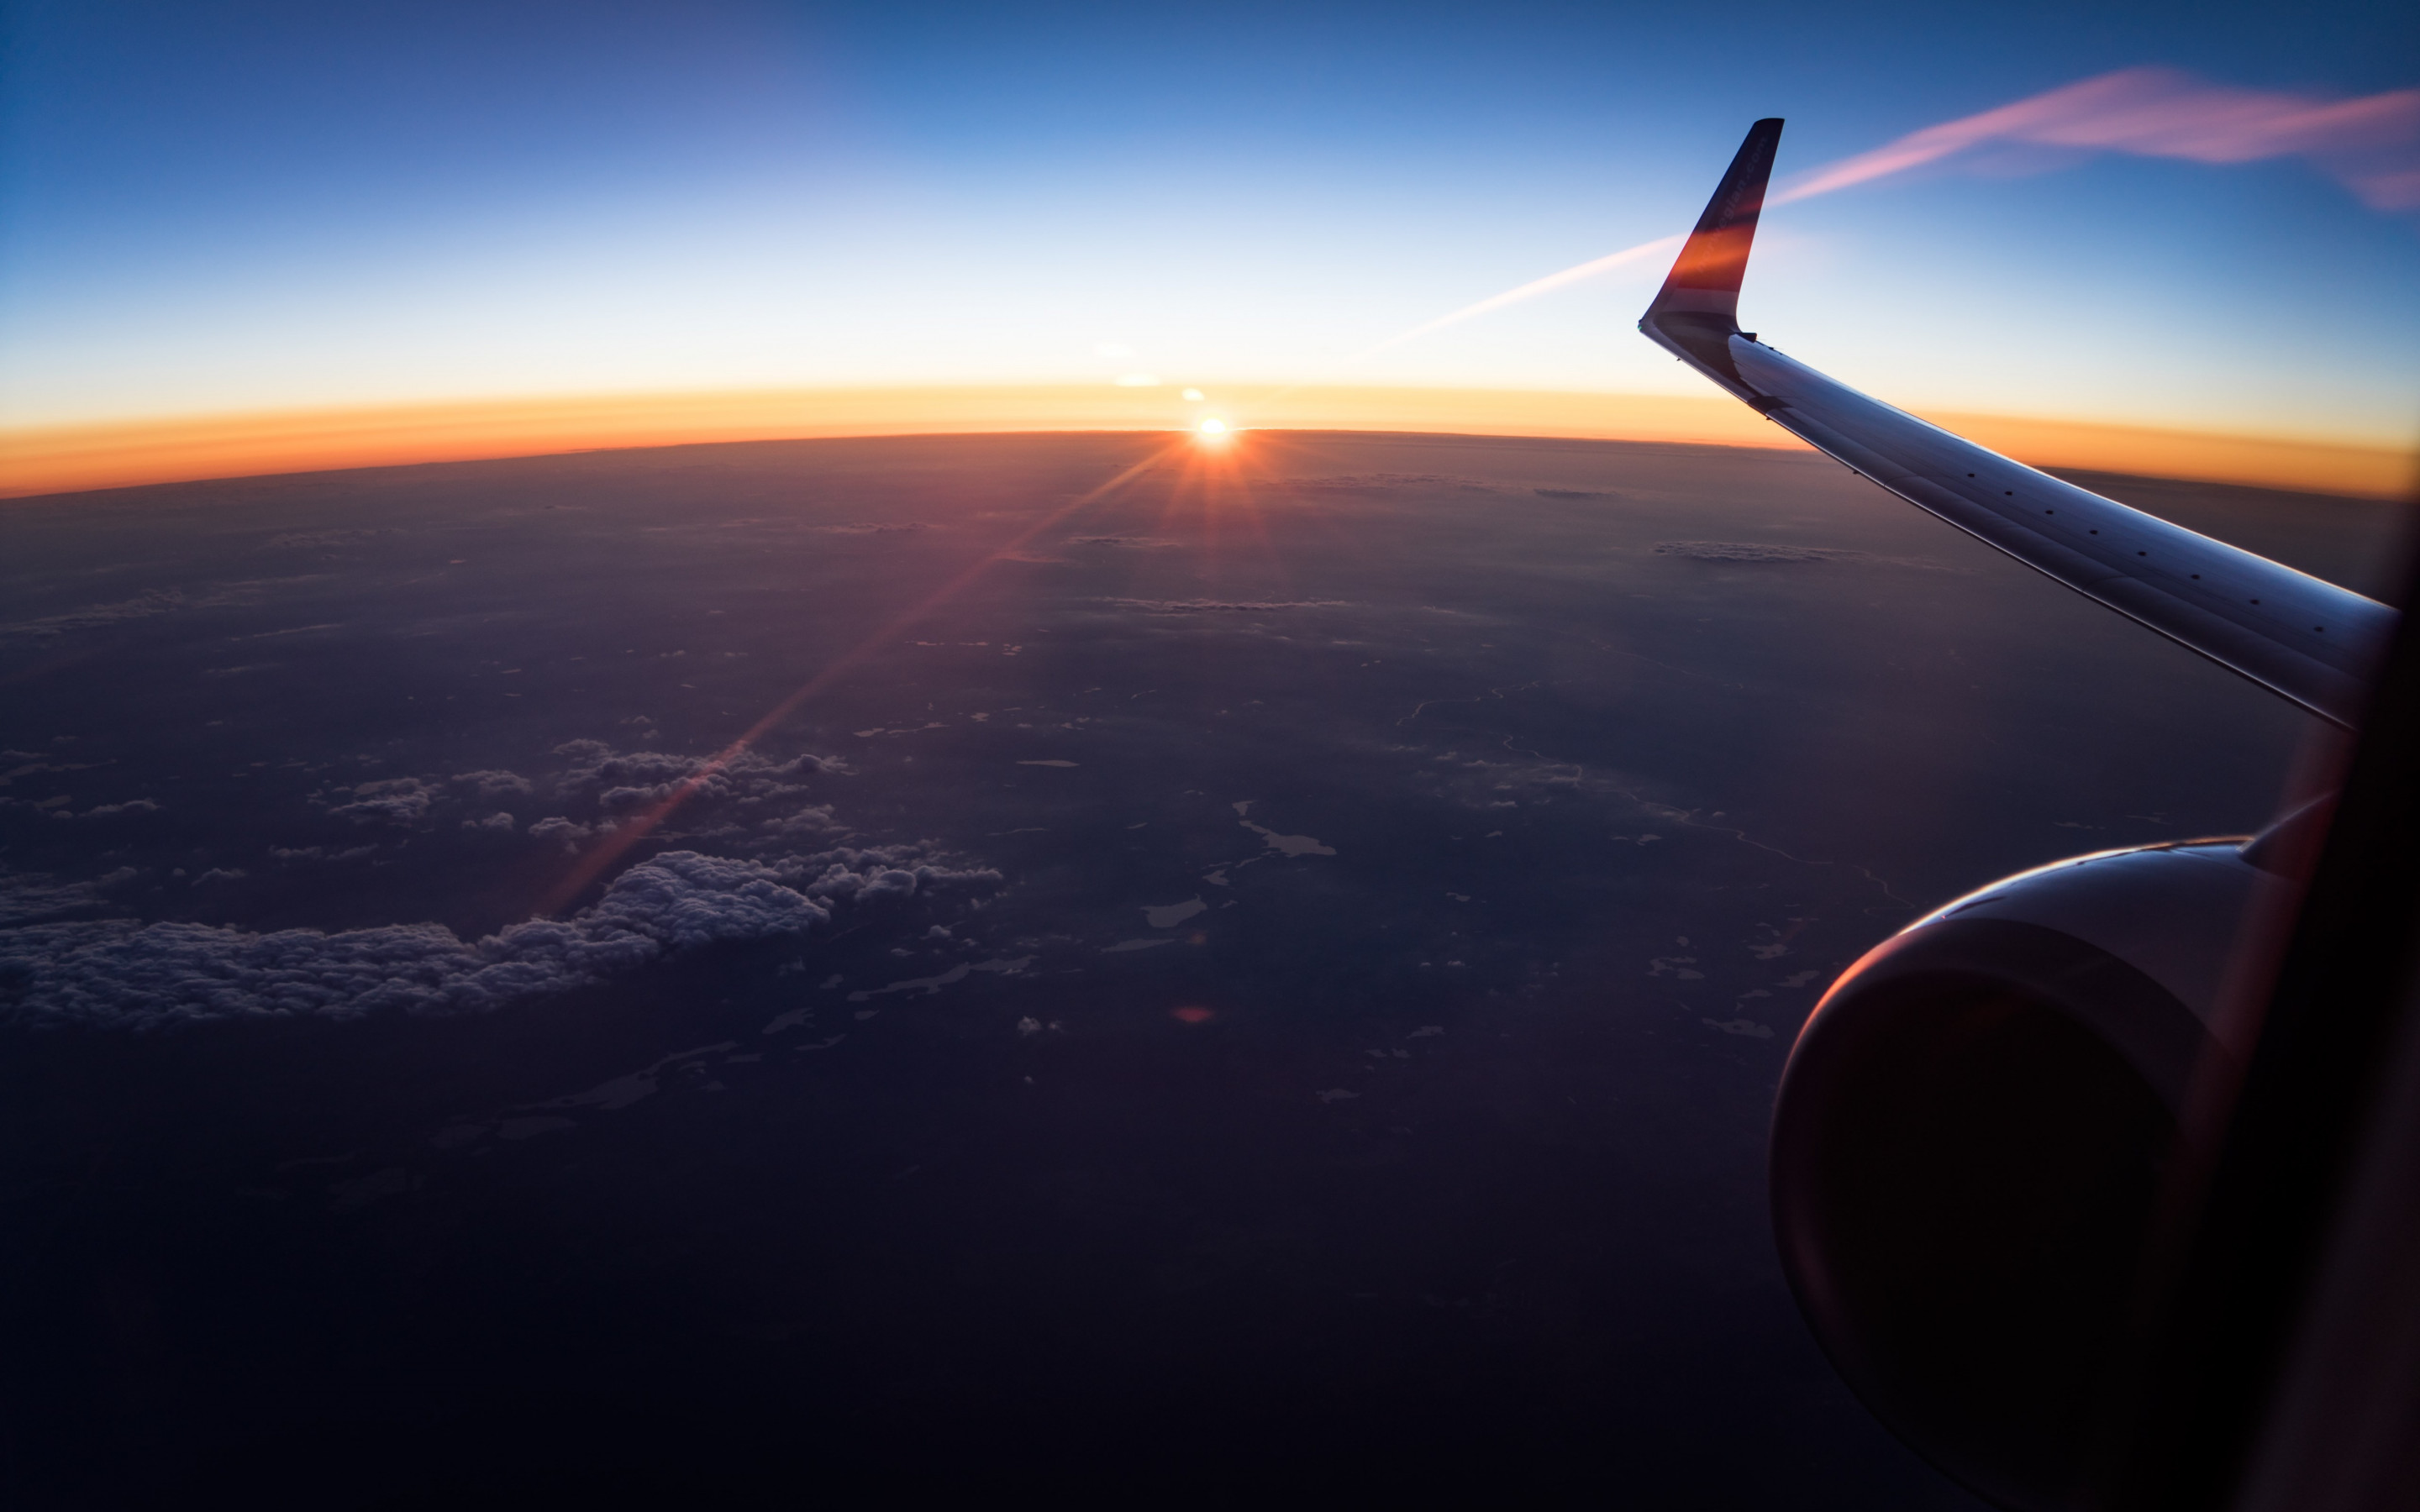 In the plane watching the sunset wallpaper 2880x1800